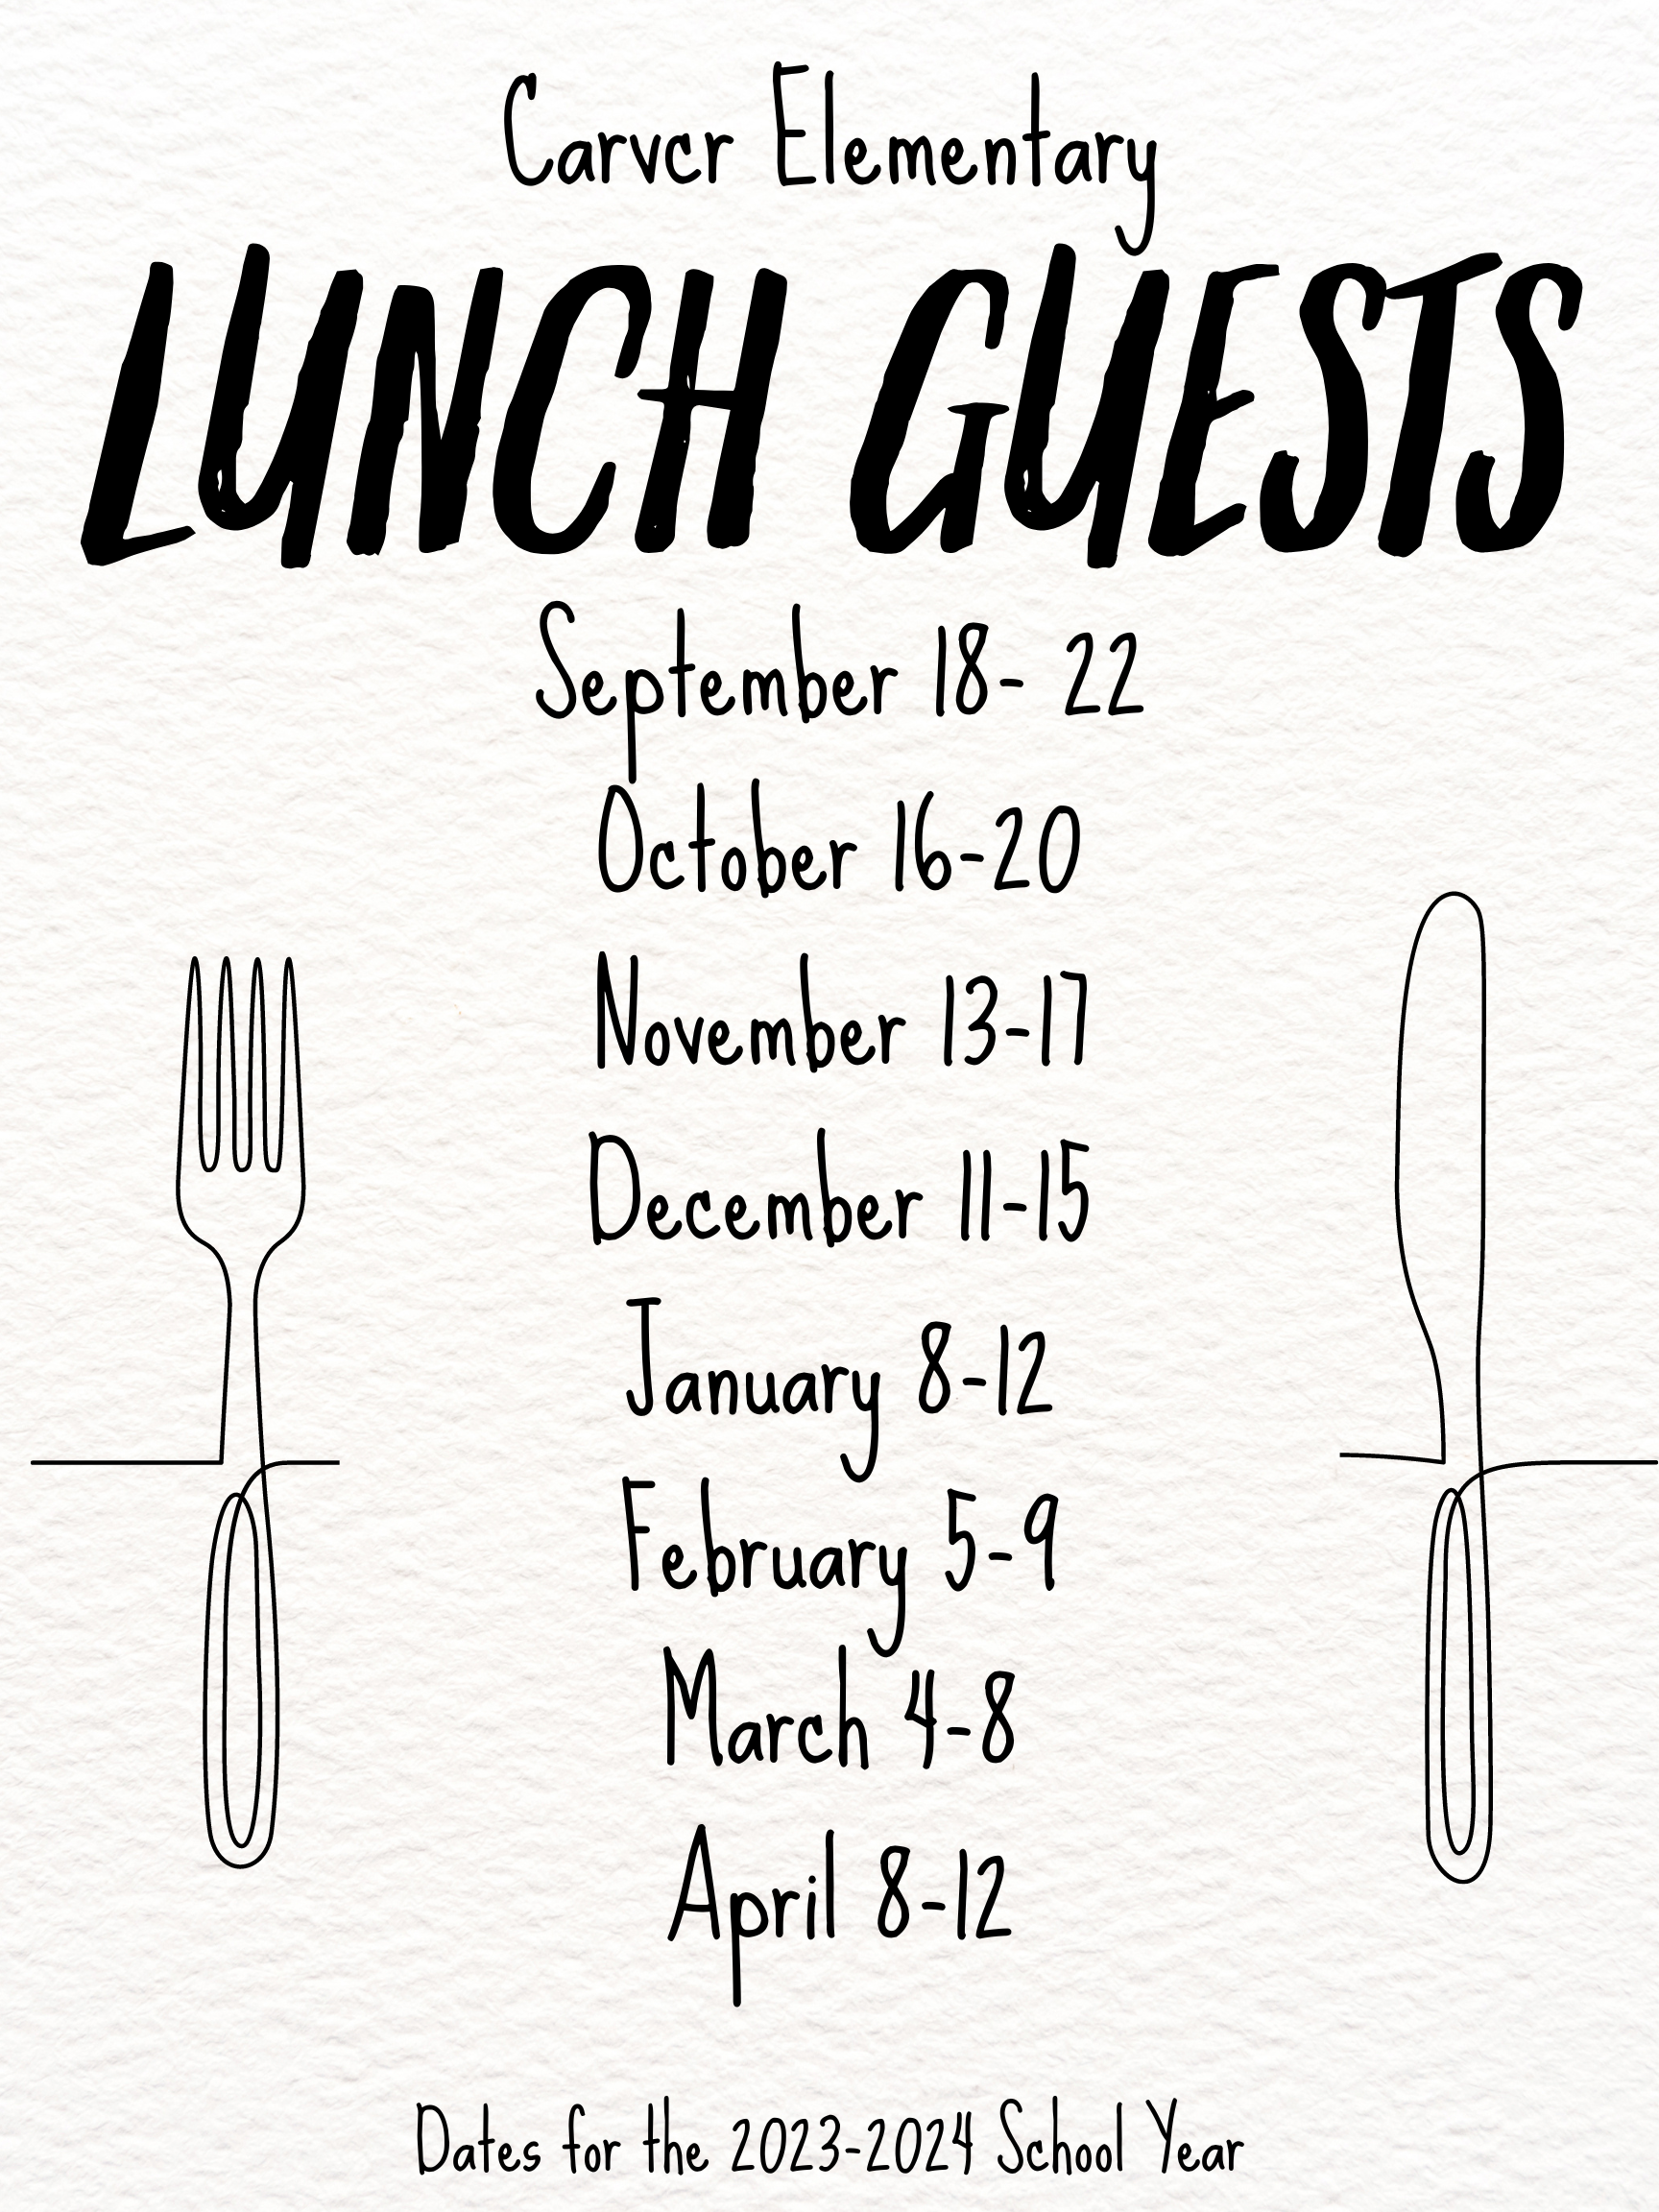 lunch guest weeks